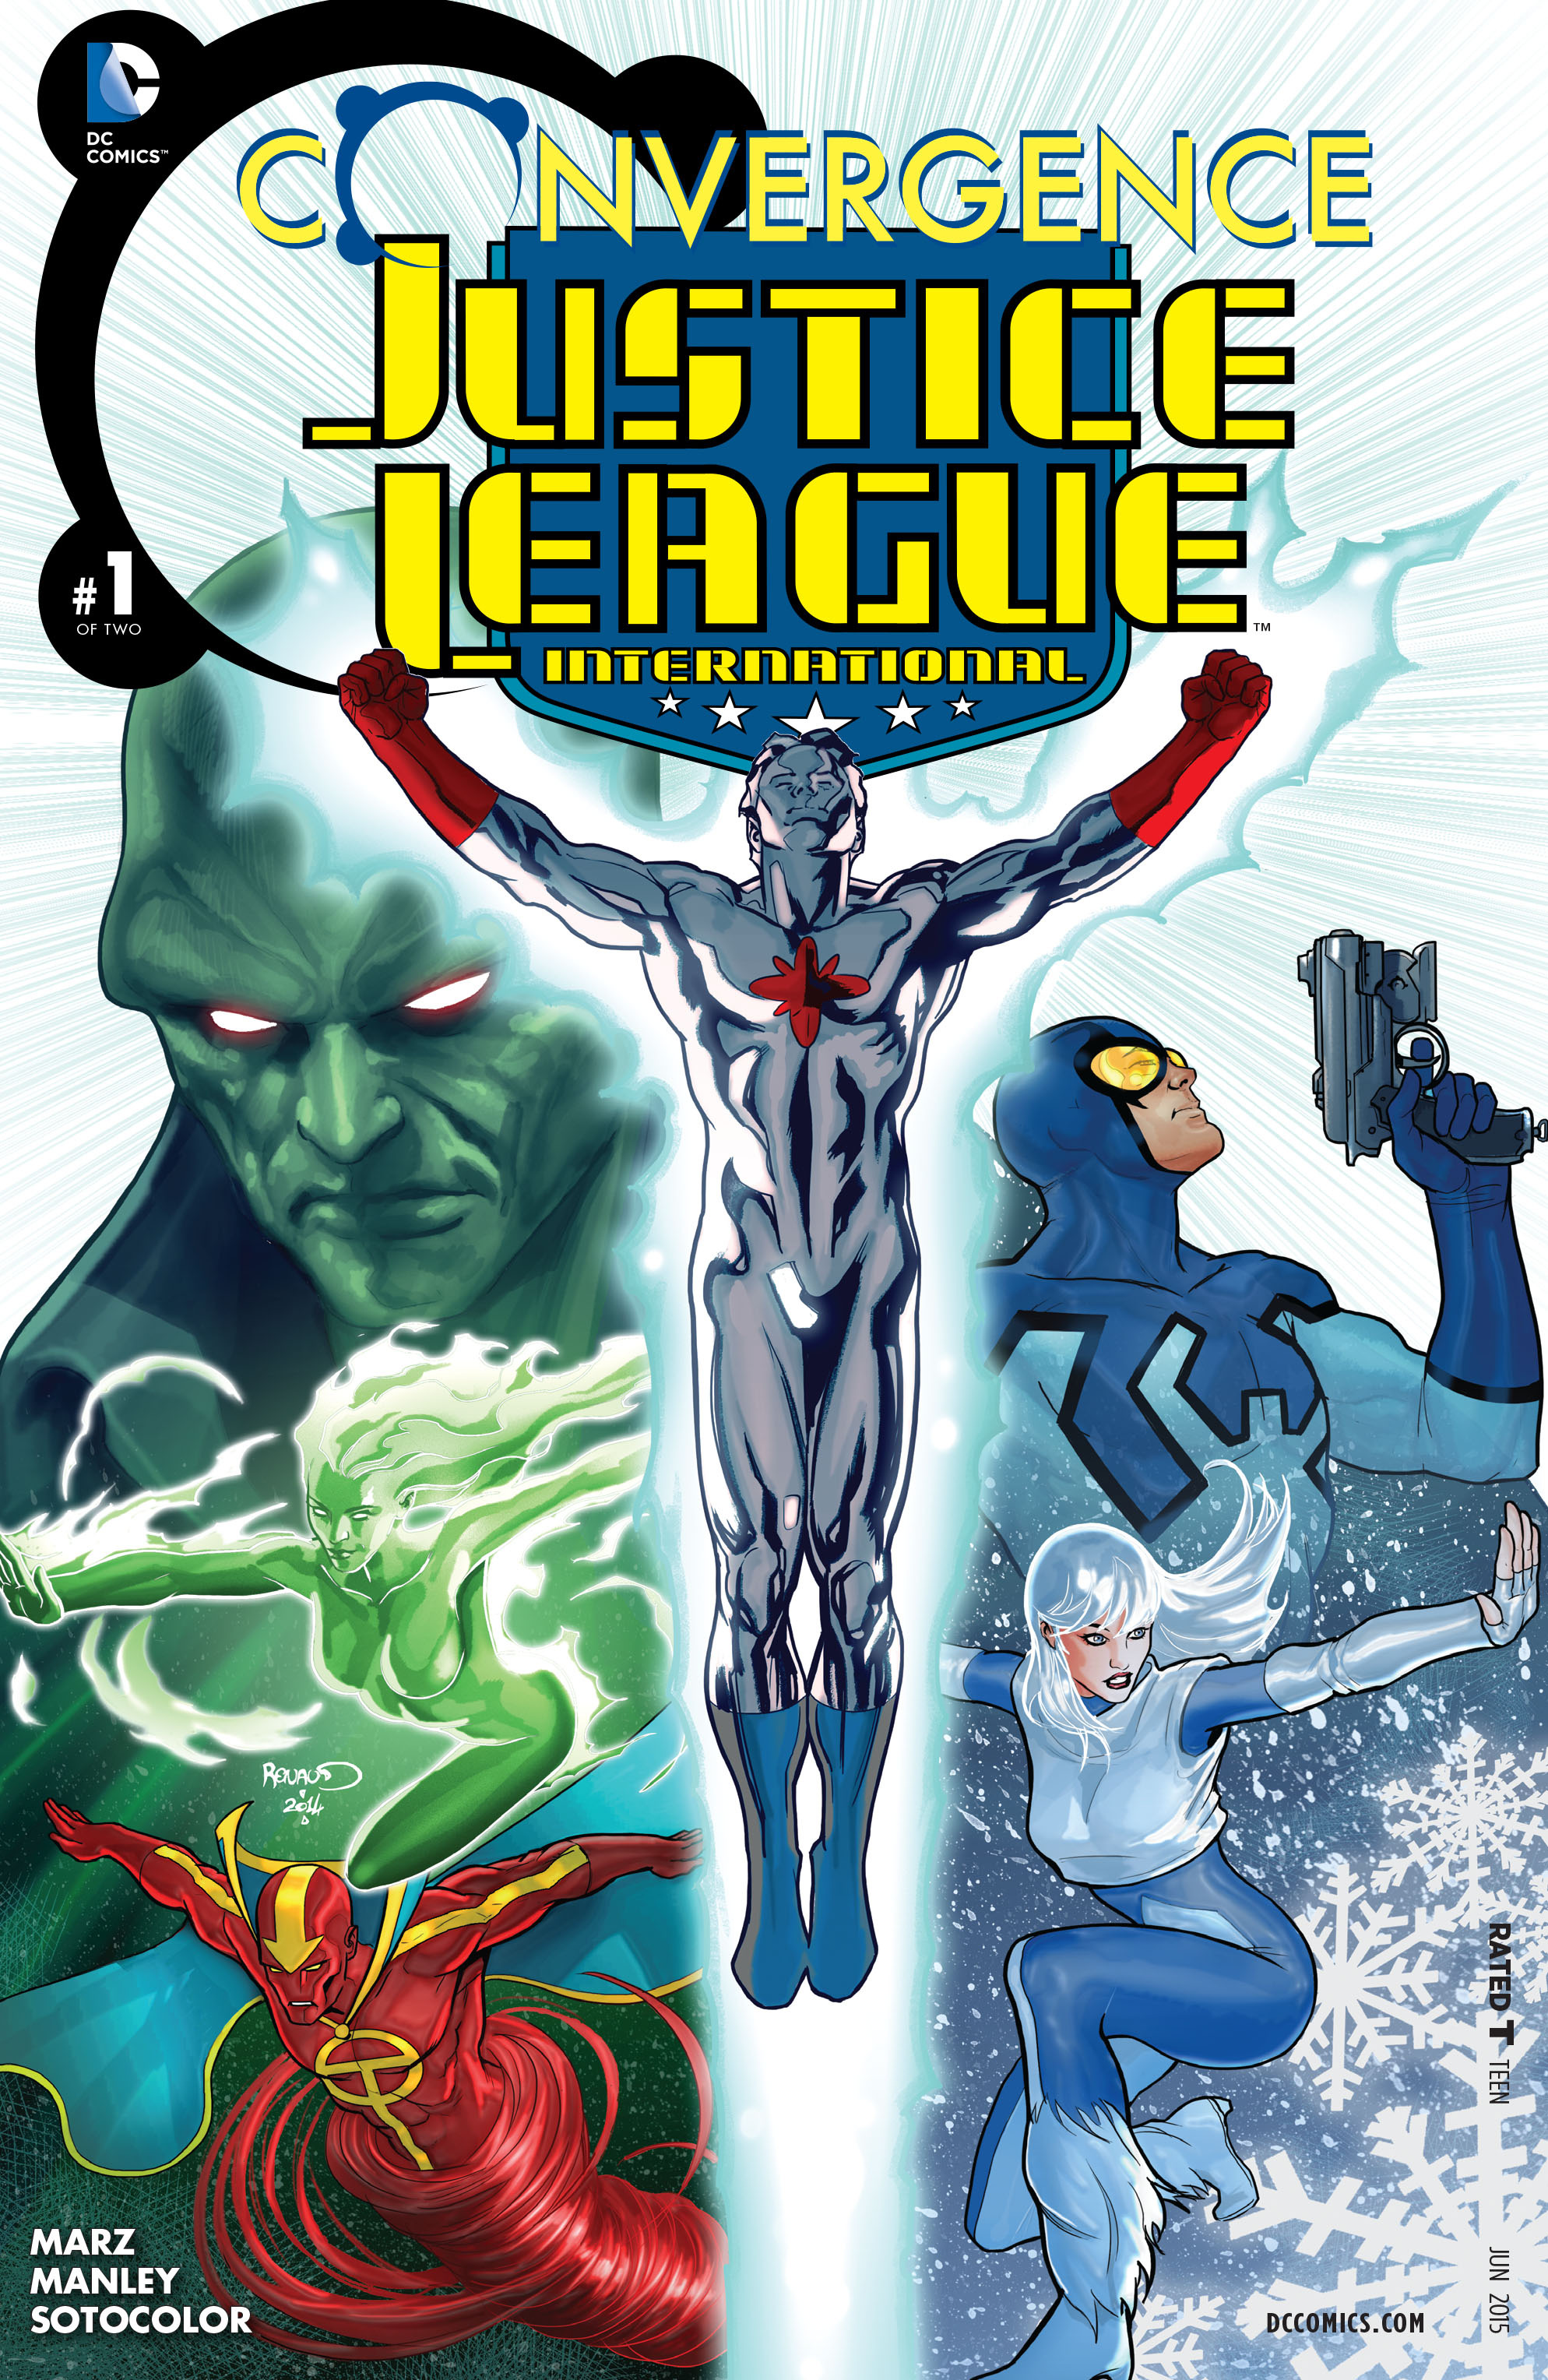 Read online Convergence Justice League International comic -  Issue #1 - 1